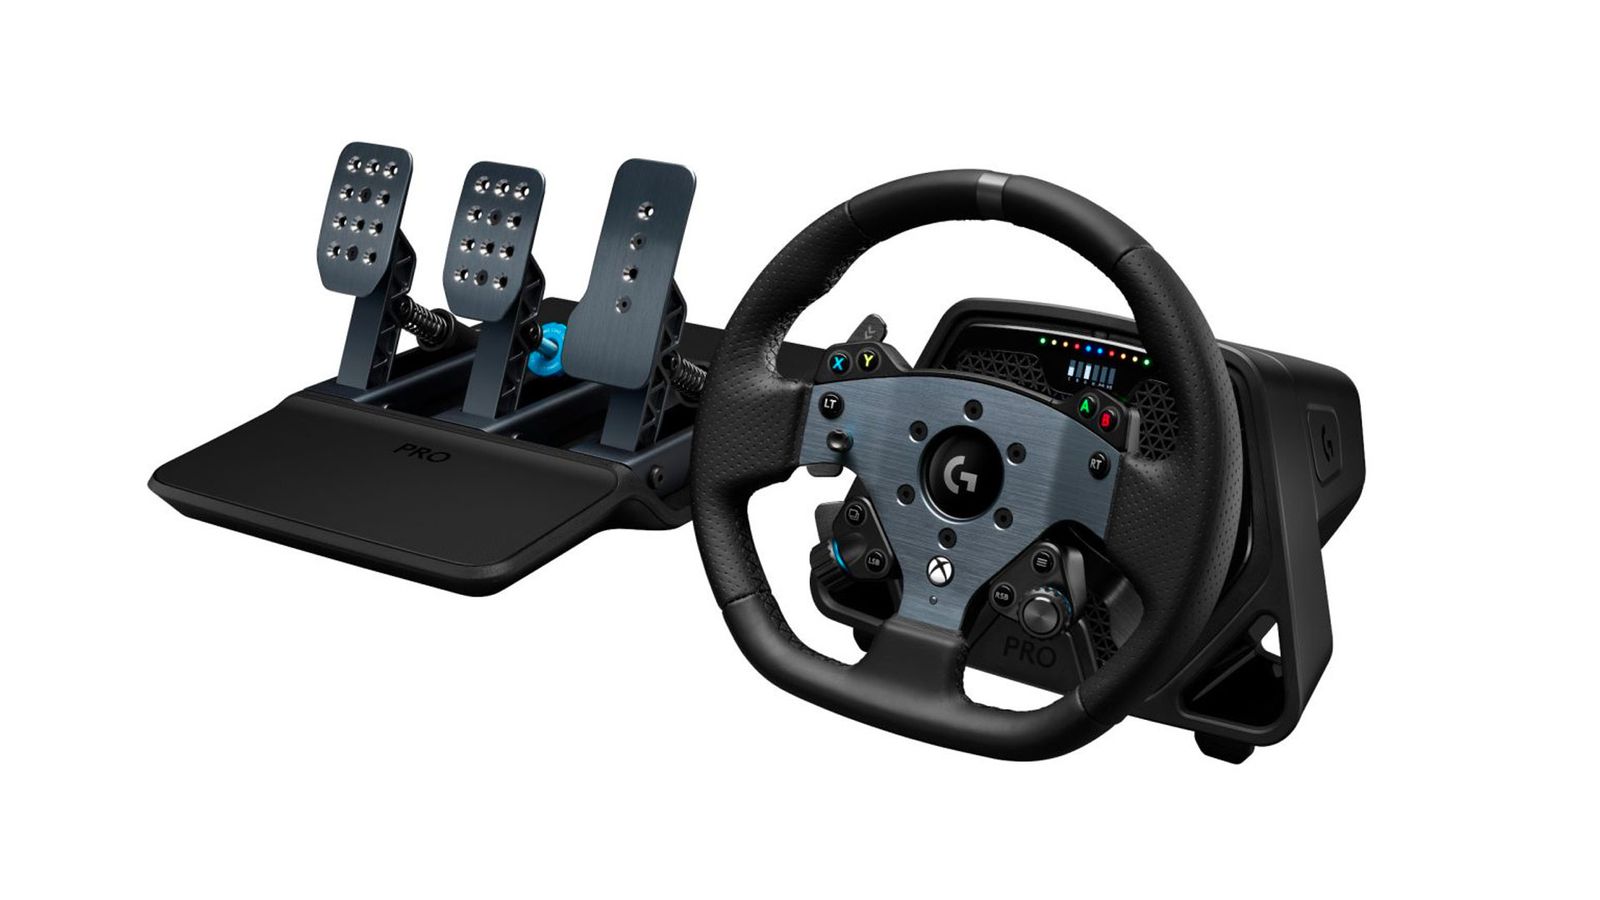 Logitech G PRO product image of a black racing wheel with dark metal trim next to a set of pedals.